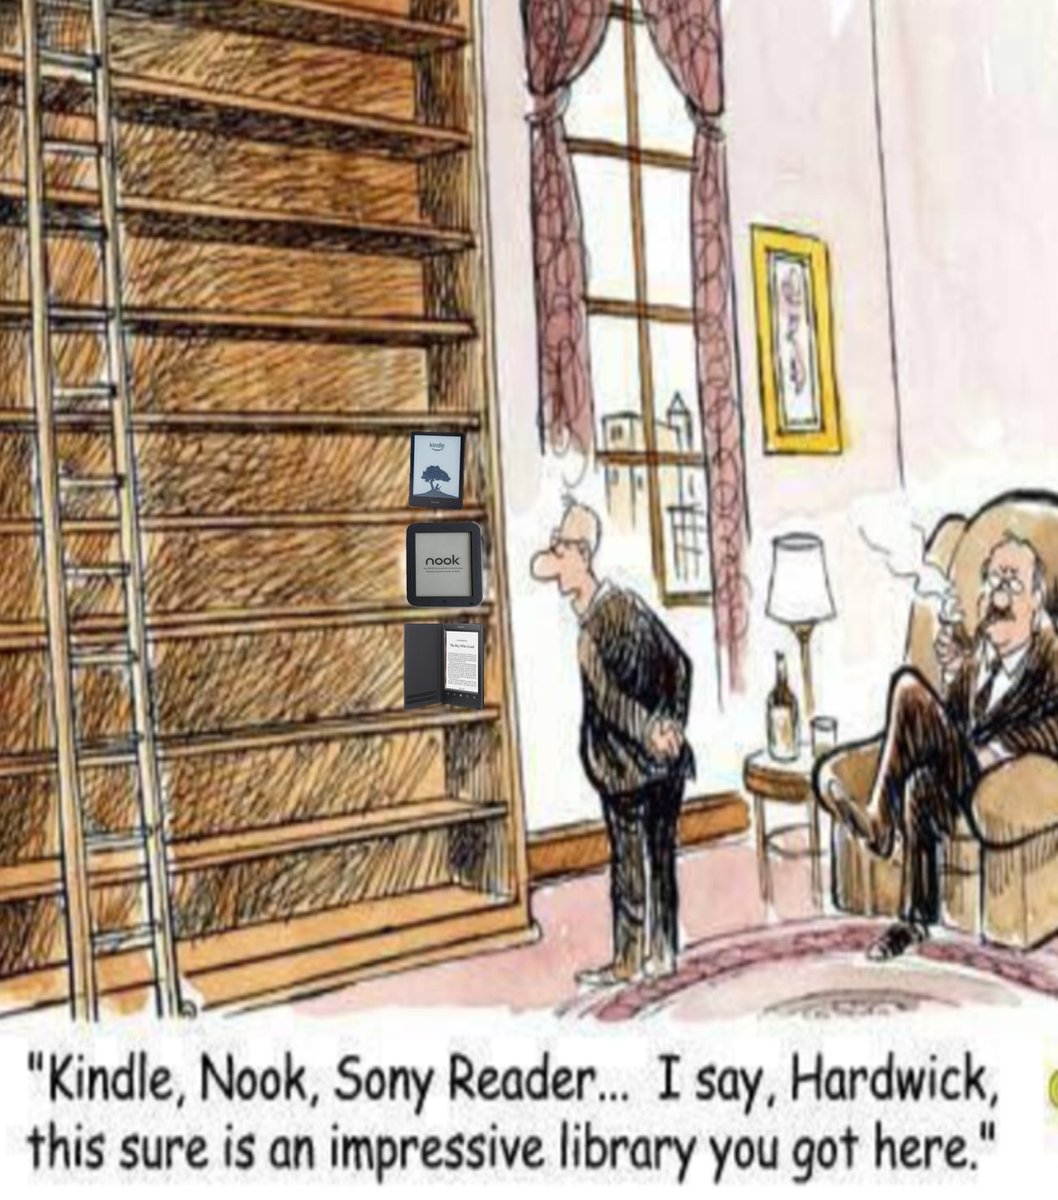 #FridayFunny 'Kindle, Nook, Sony Reader... I say, Hardwick, this sure is an impressive library you've got here.'